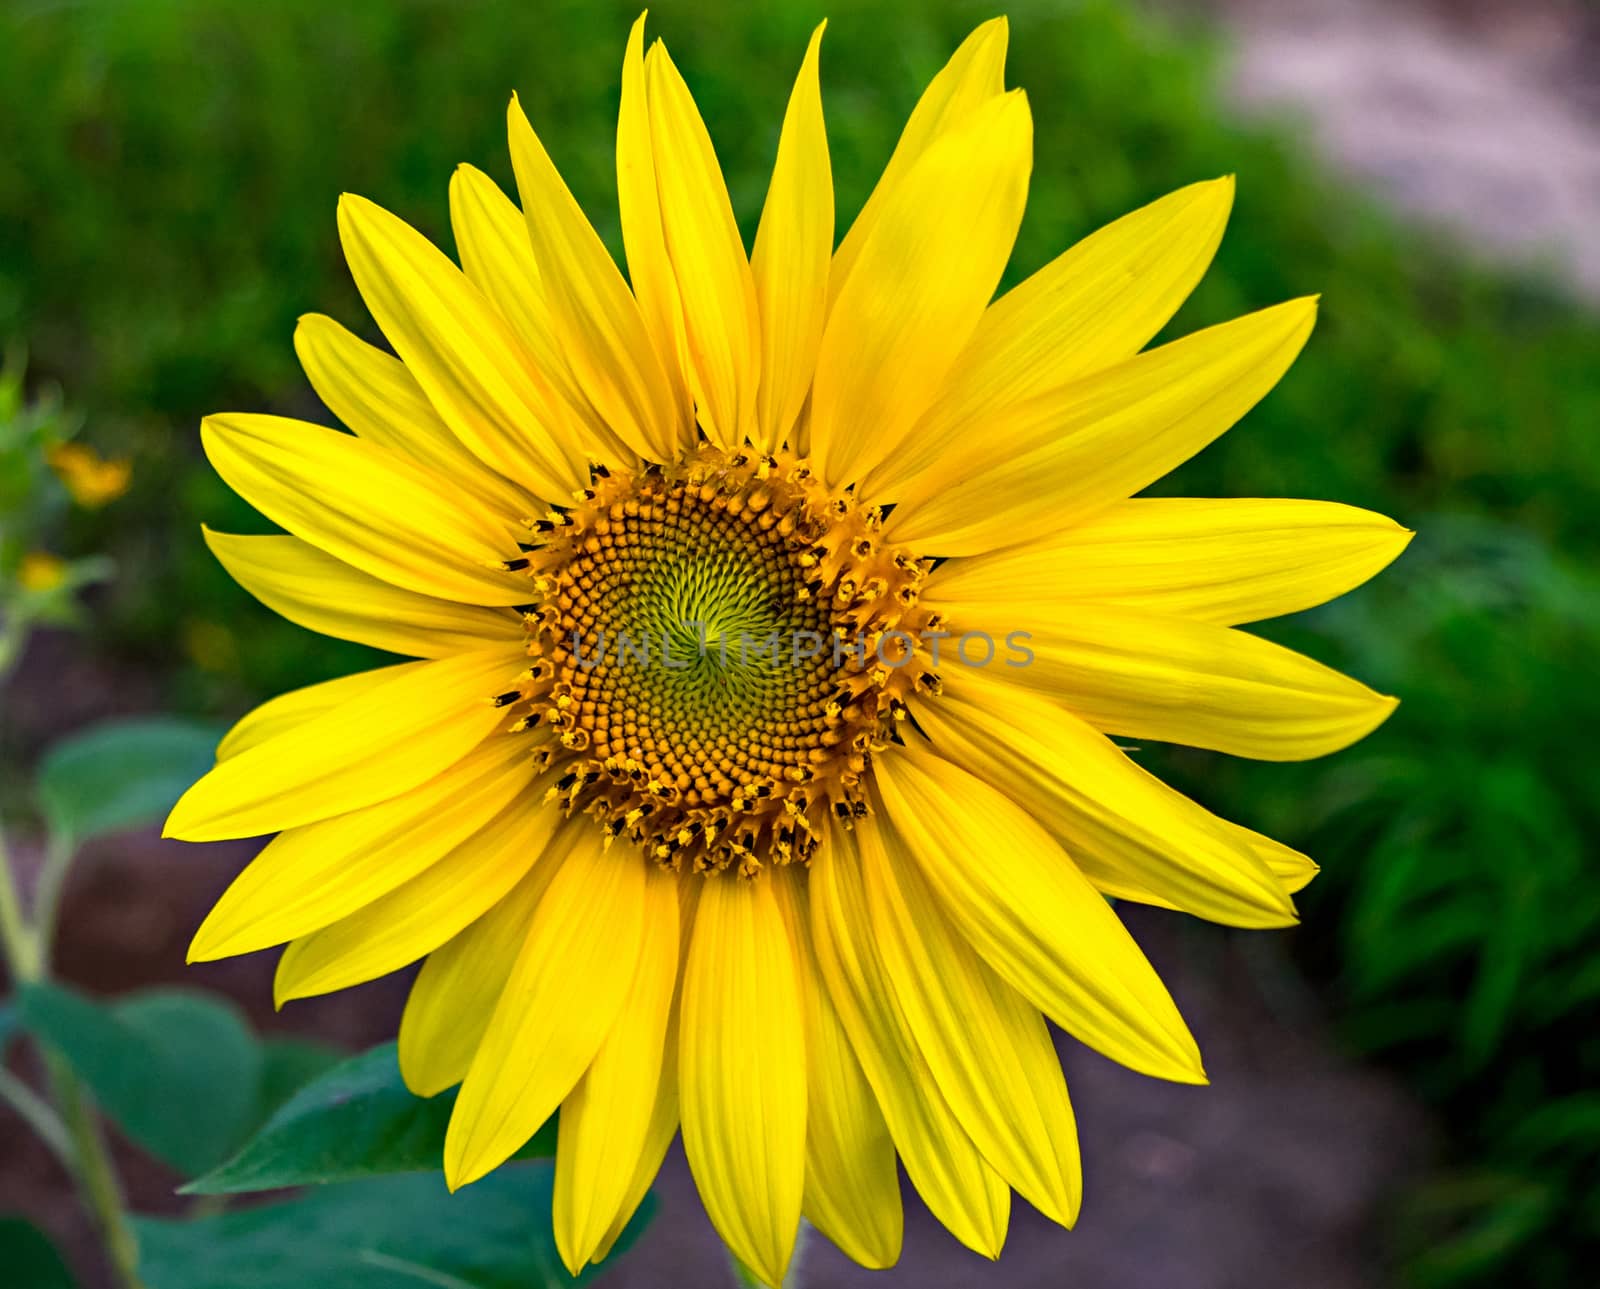 Close up, isolated  image of a Sunflower shinning in the sunlight. Scientific name : Helianthus.